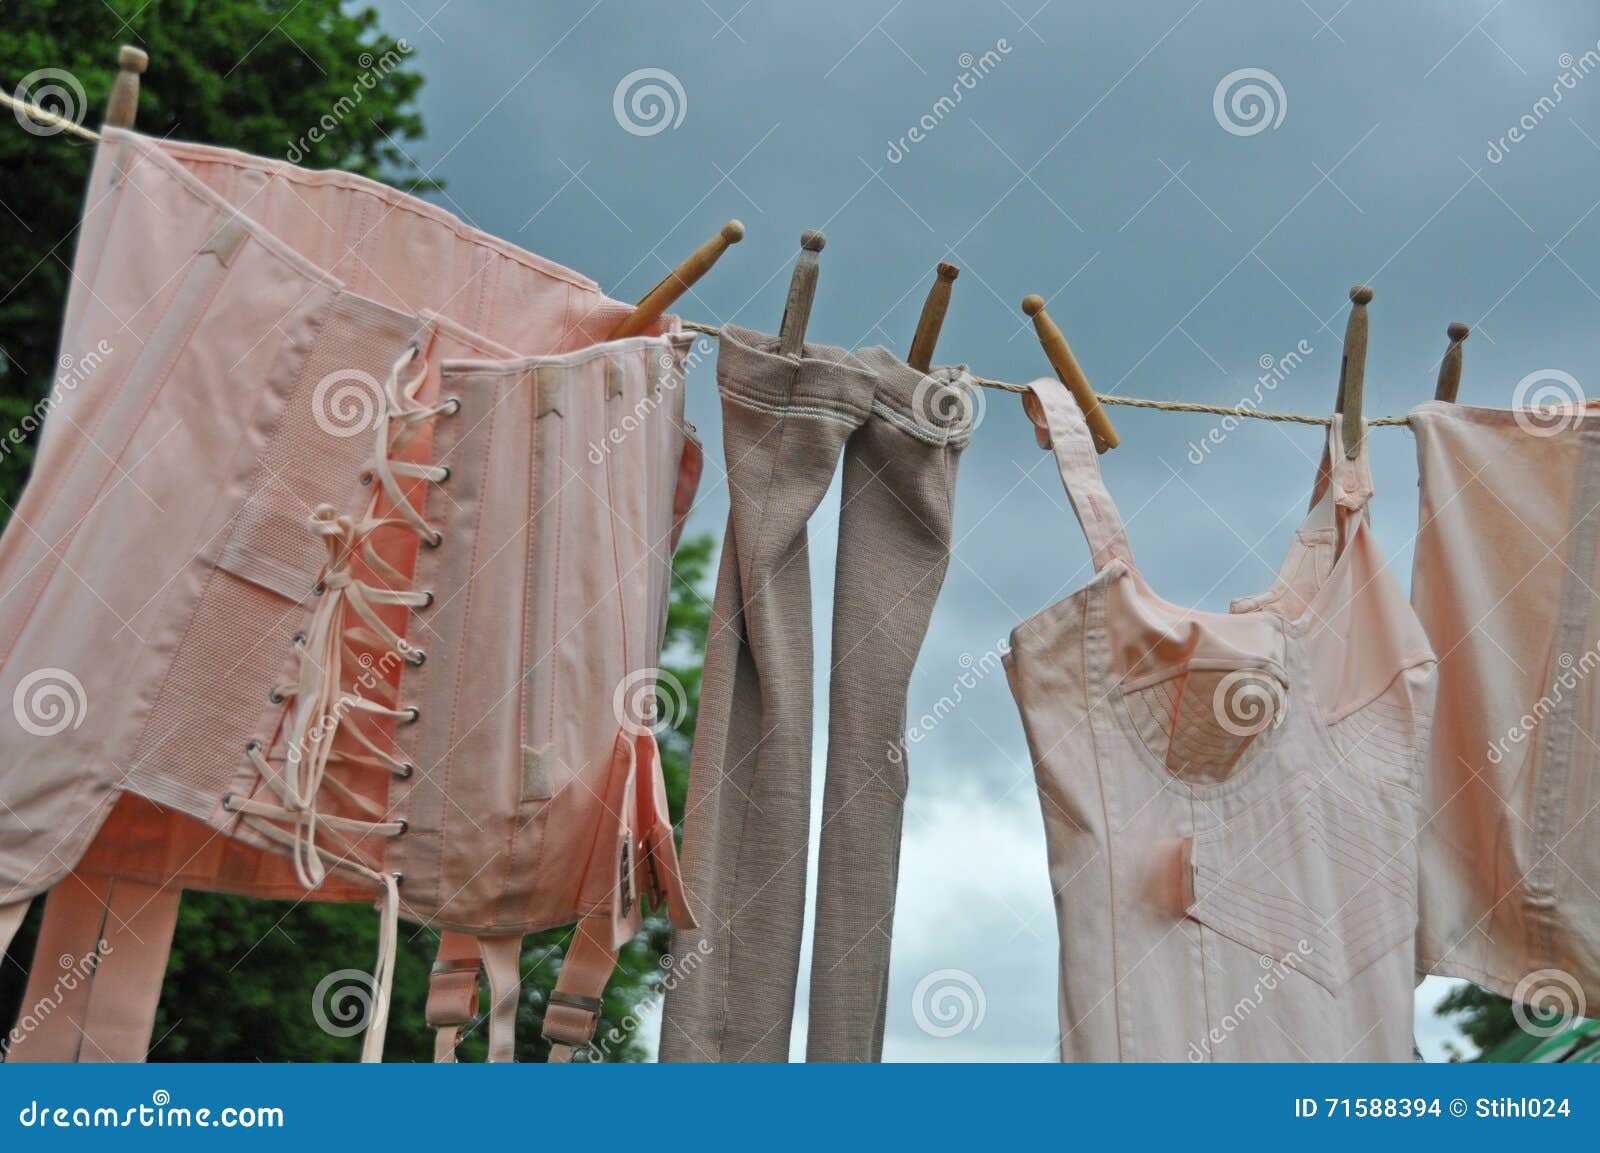 Drying Underwear on Clothesline Stock Photo - Image of line